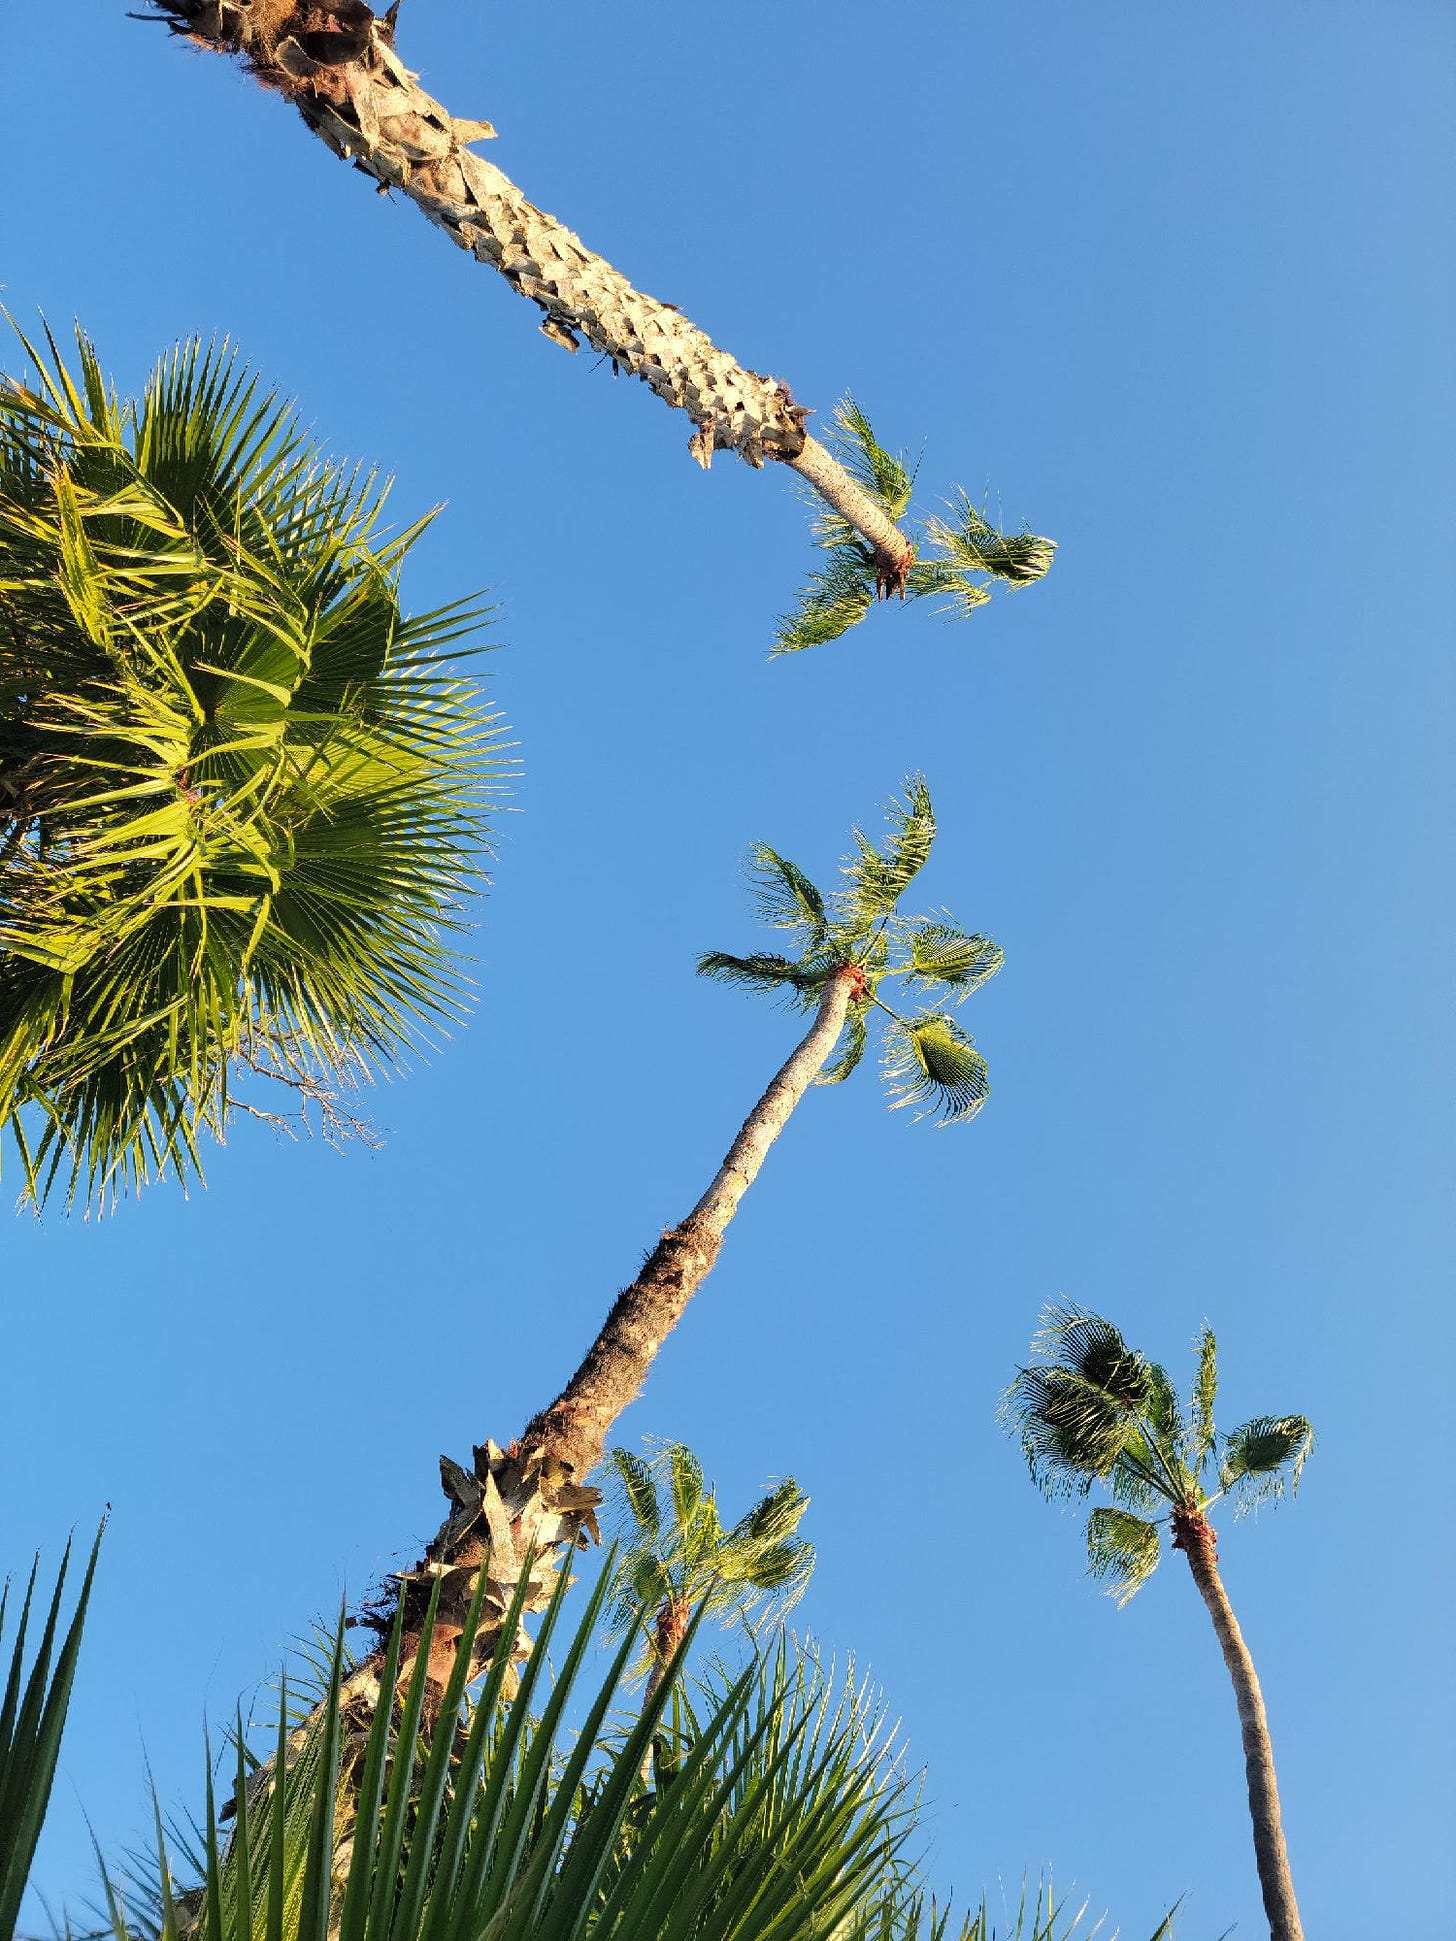 Looking up a palm trees.